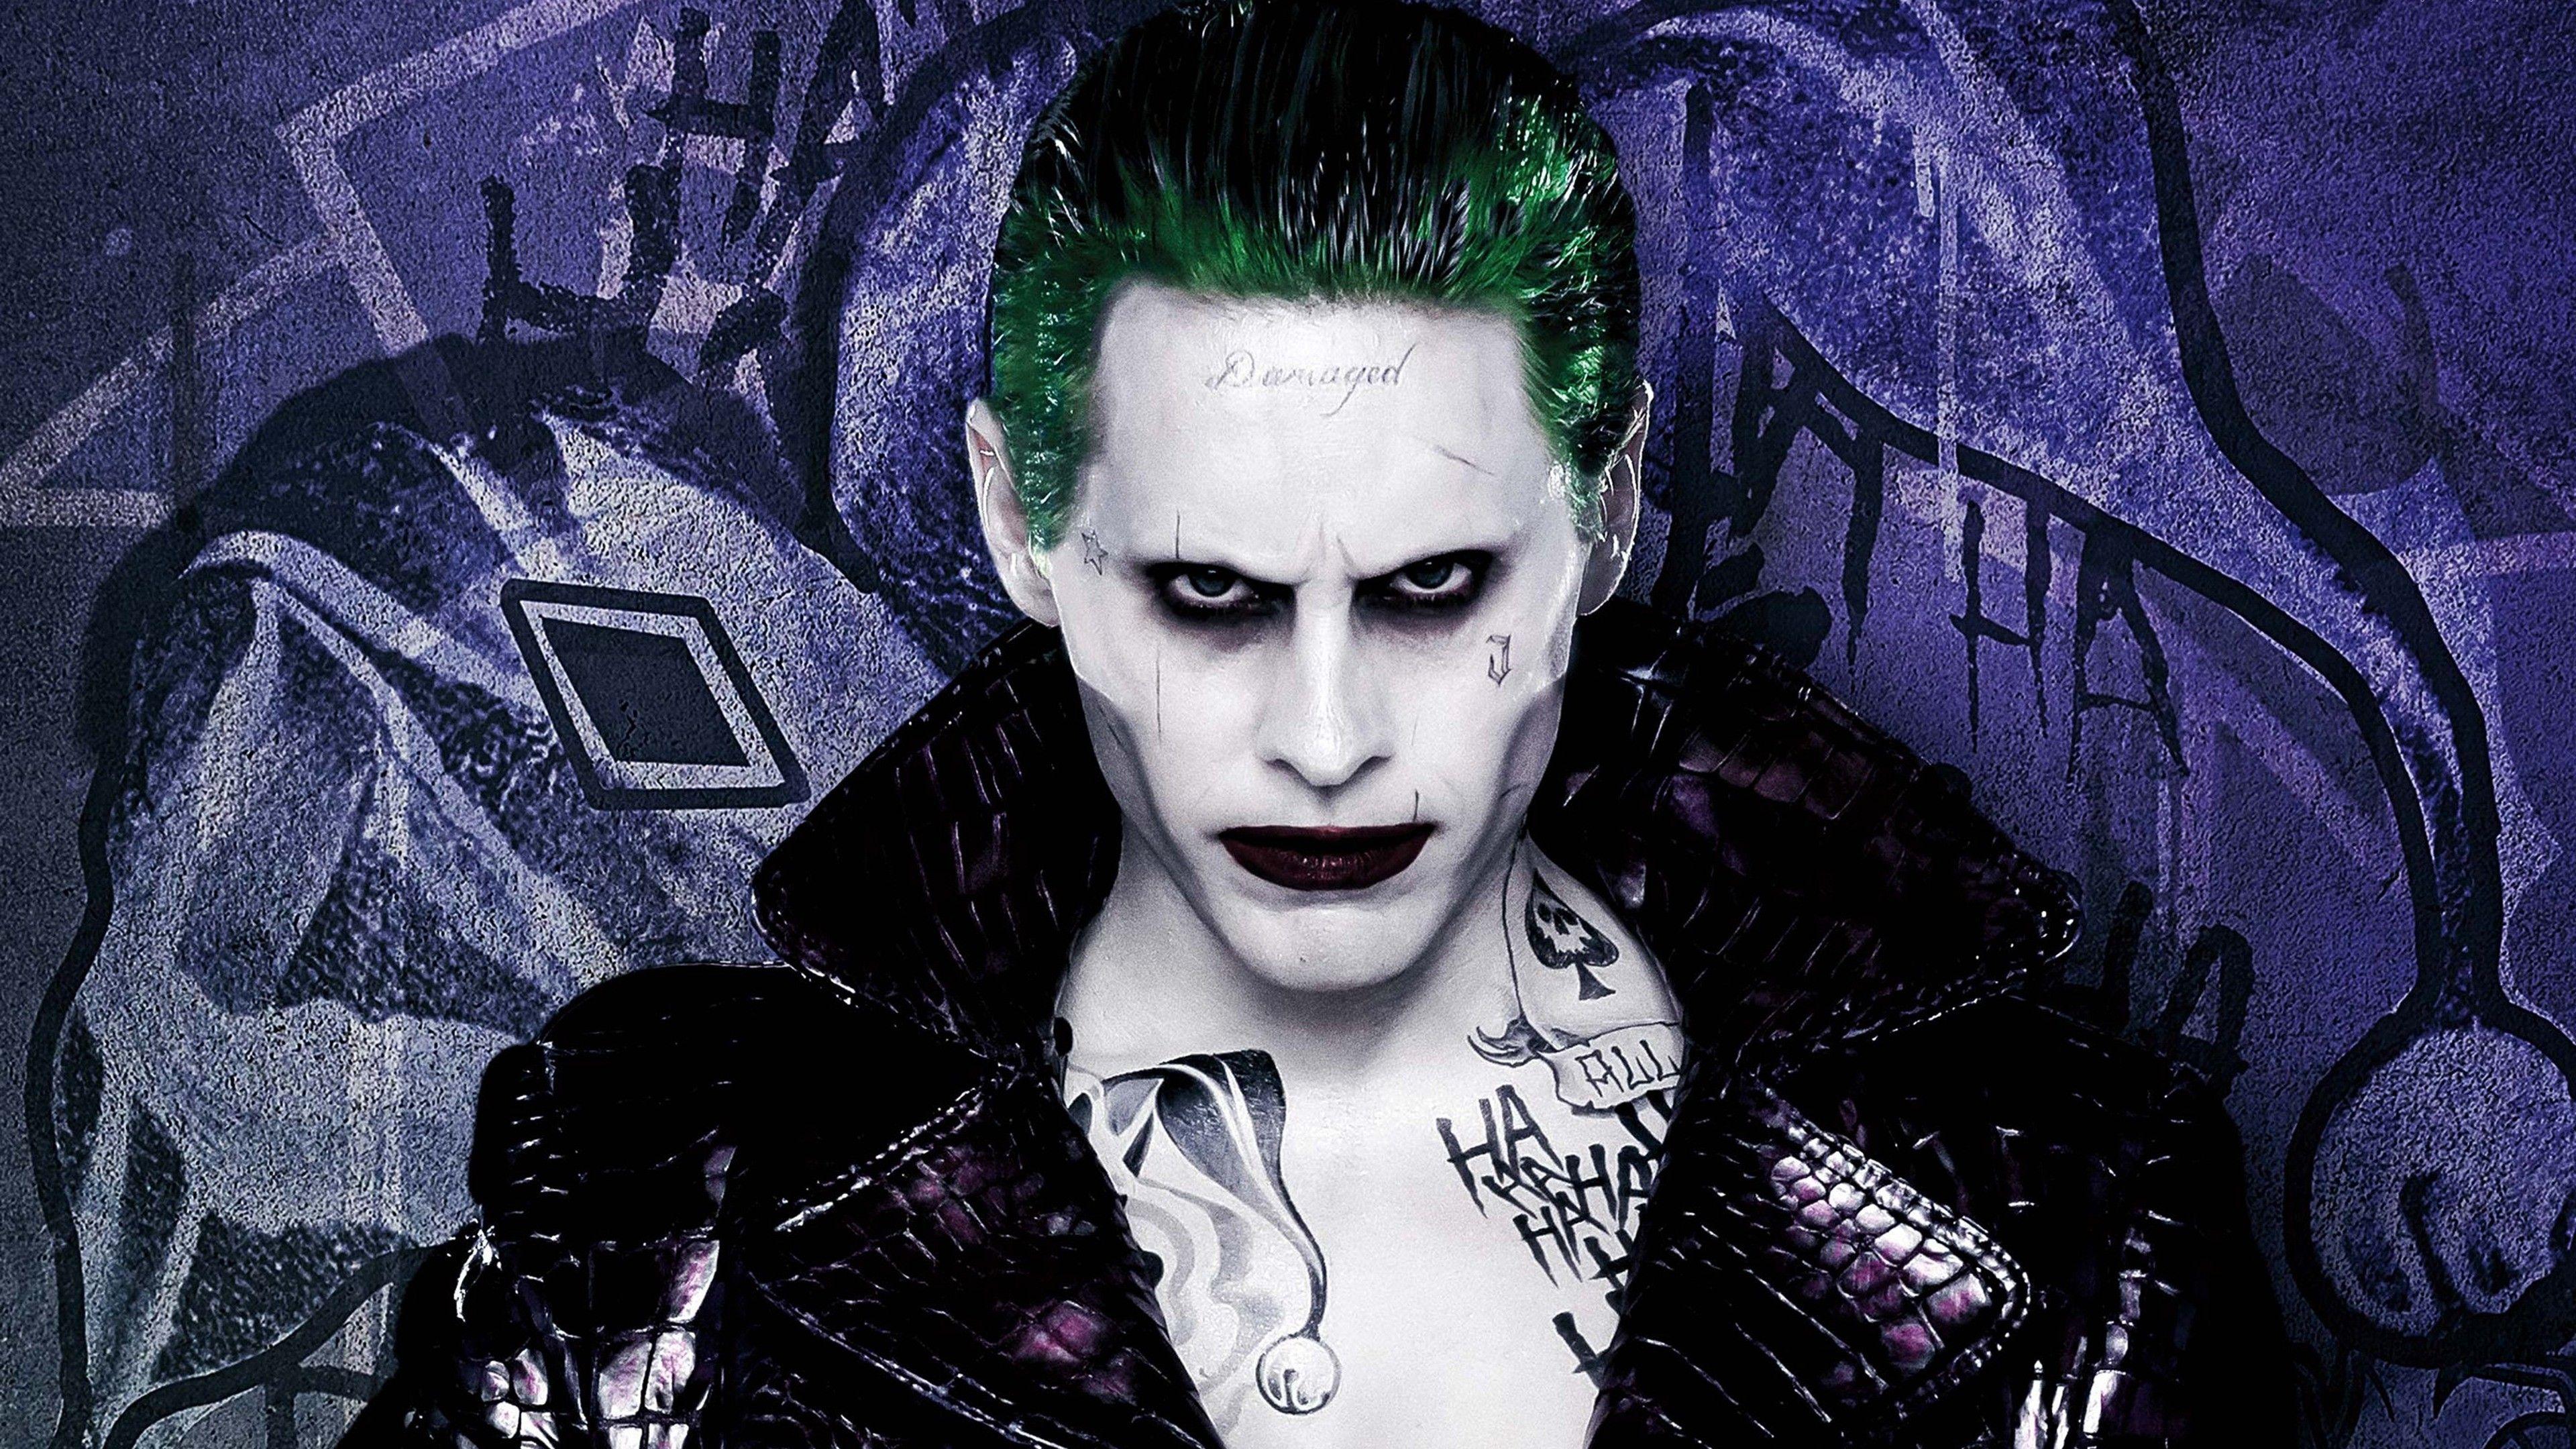 Wallpapers Suicide squad, The joker, Jared leto HD, Picture, Image